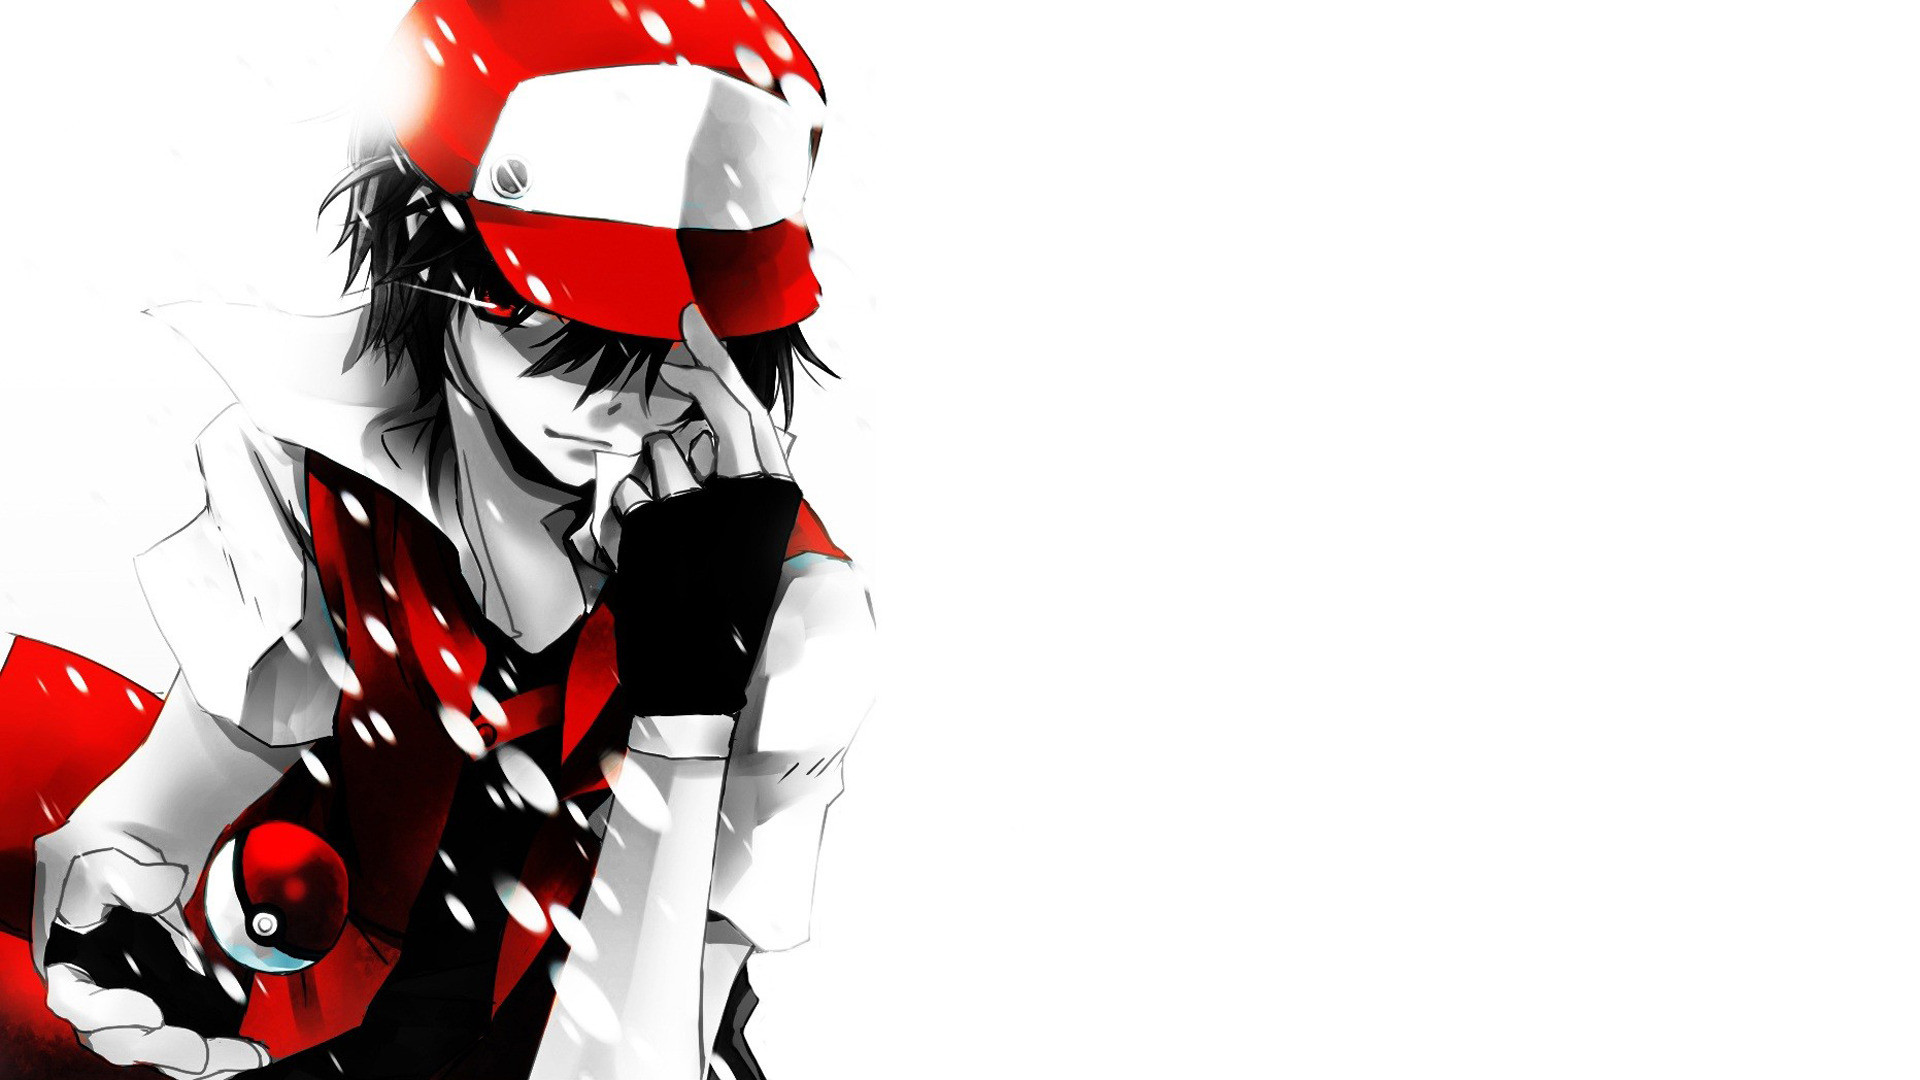 10 Latest Pokemon Trainer Red Wallpaper Hd FULL HD 1080p For PC